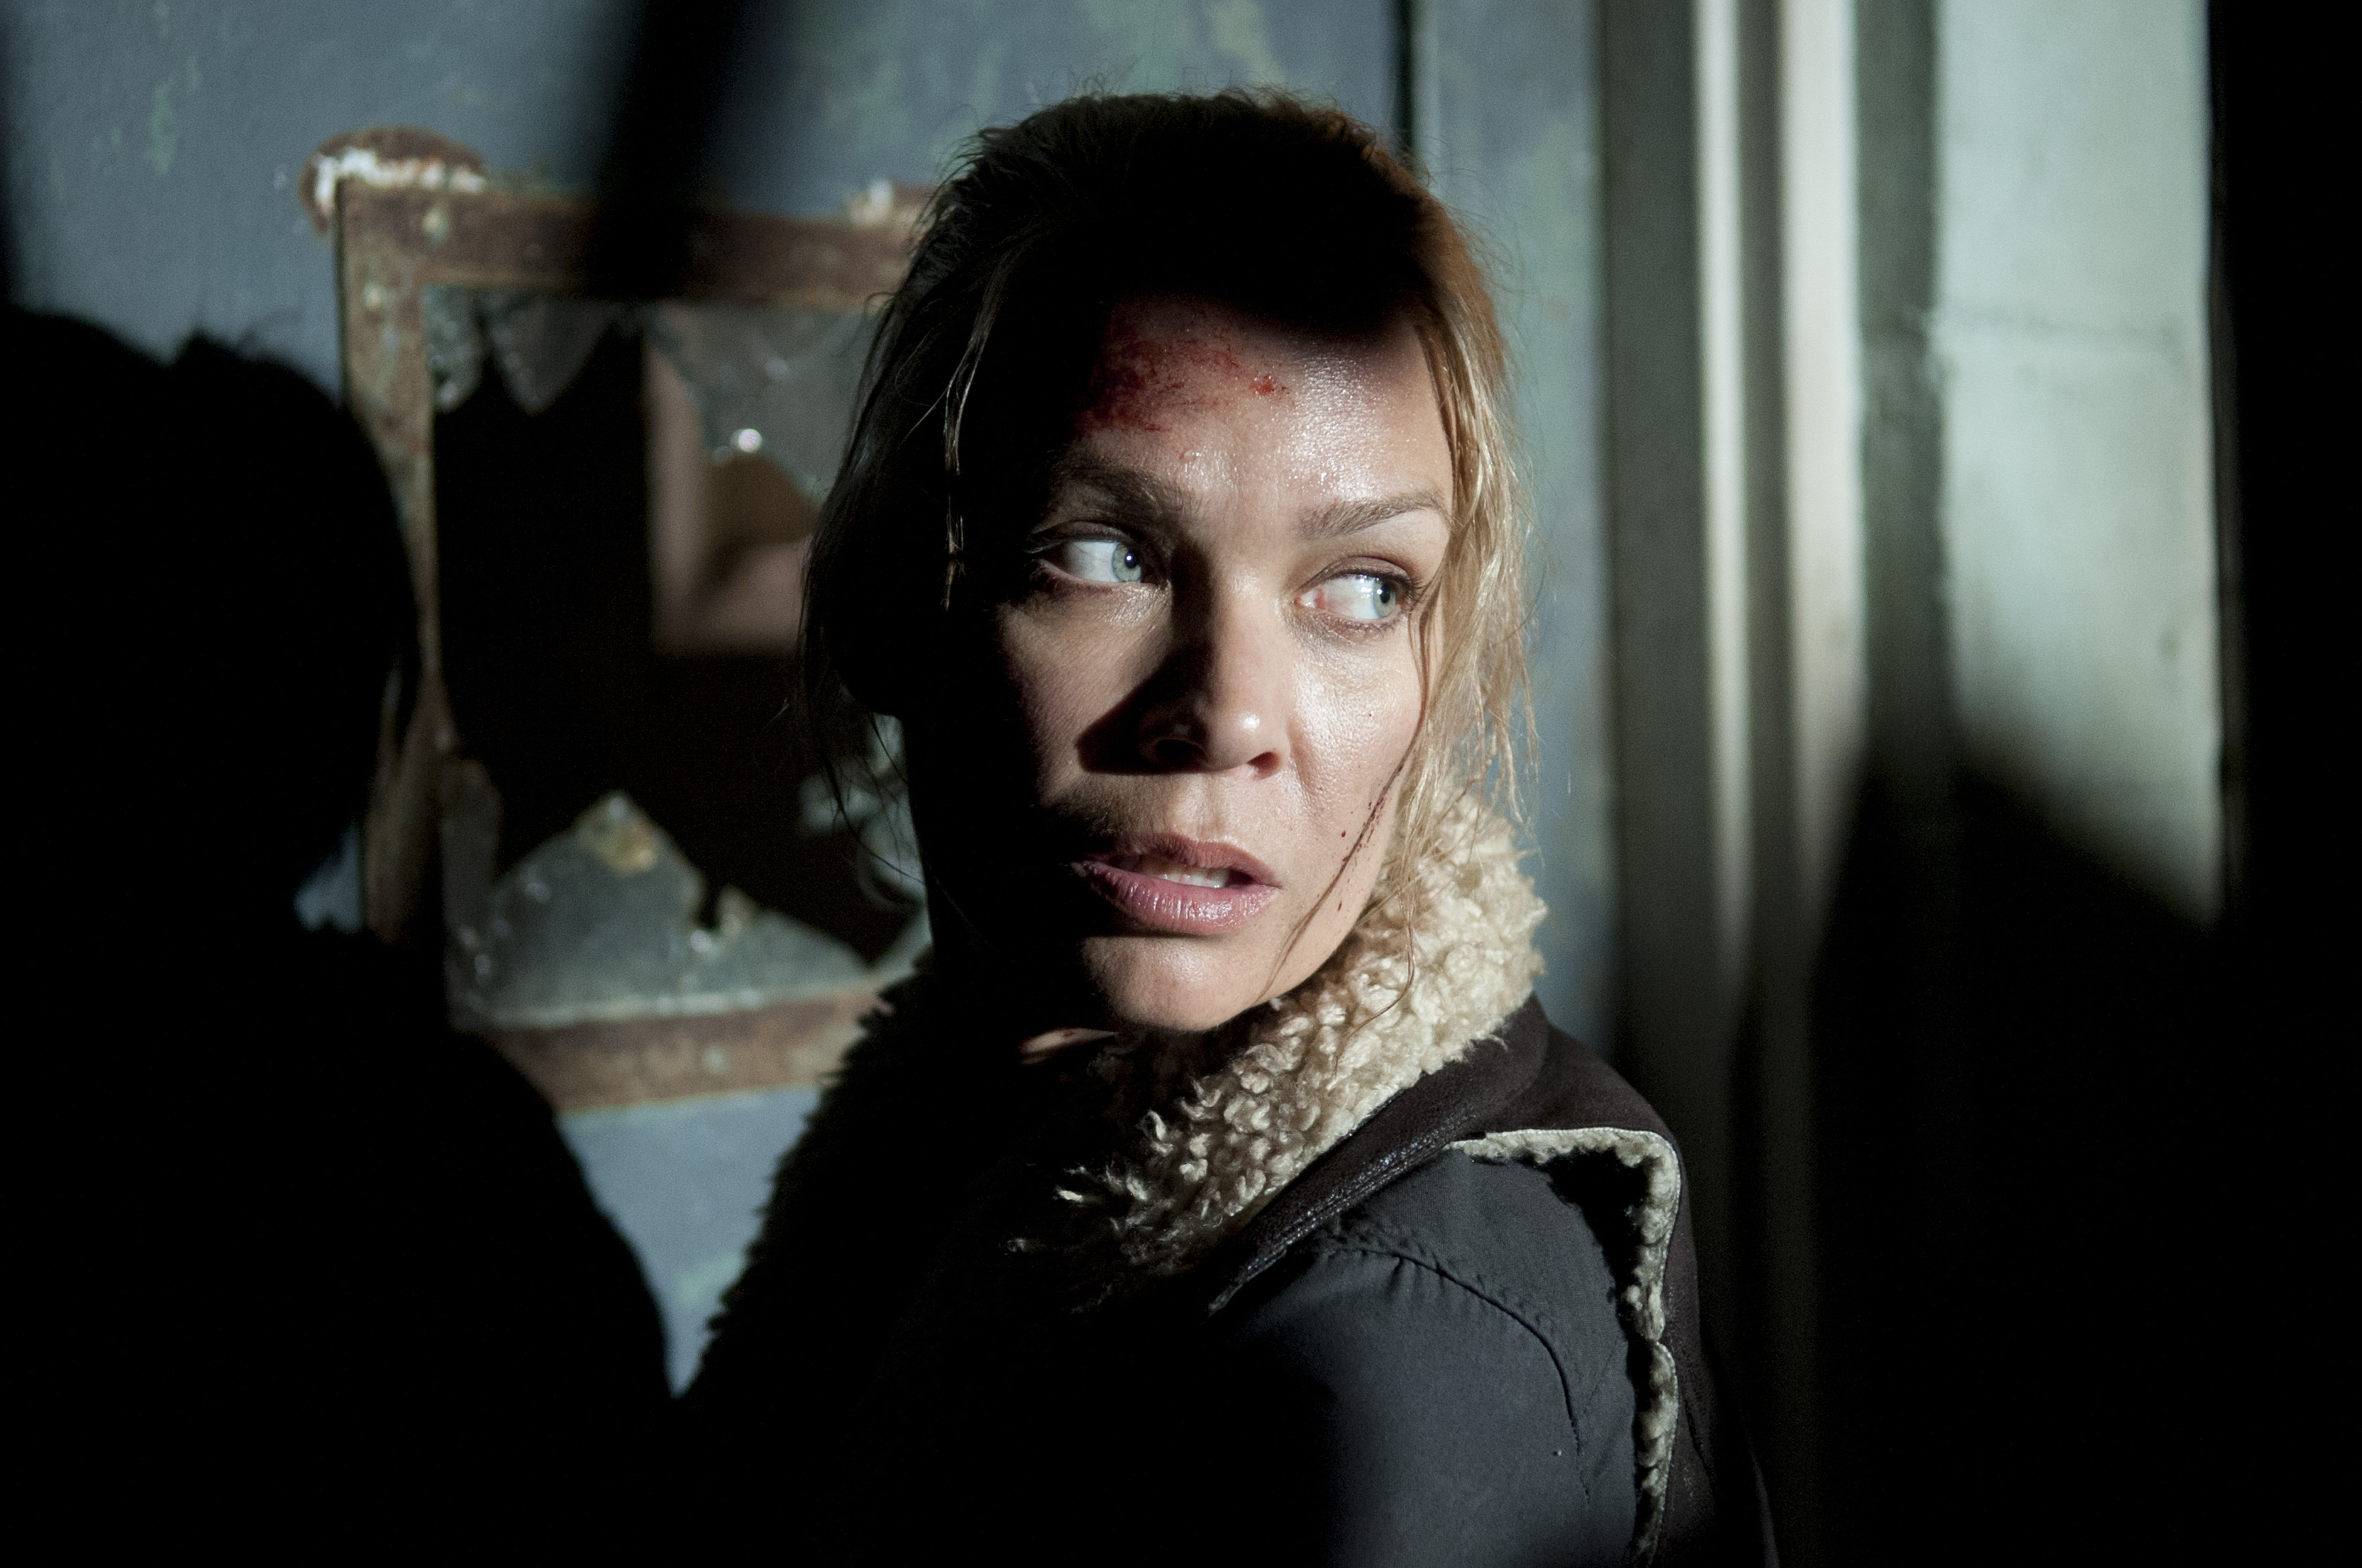 tv show, the walking dead, andrea (the walking dead), laurie holden